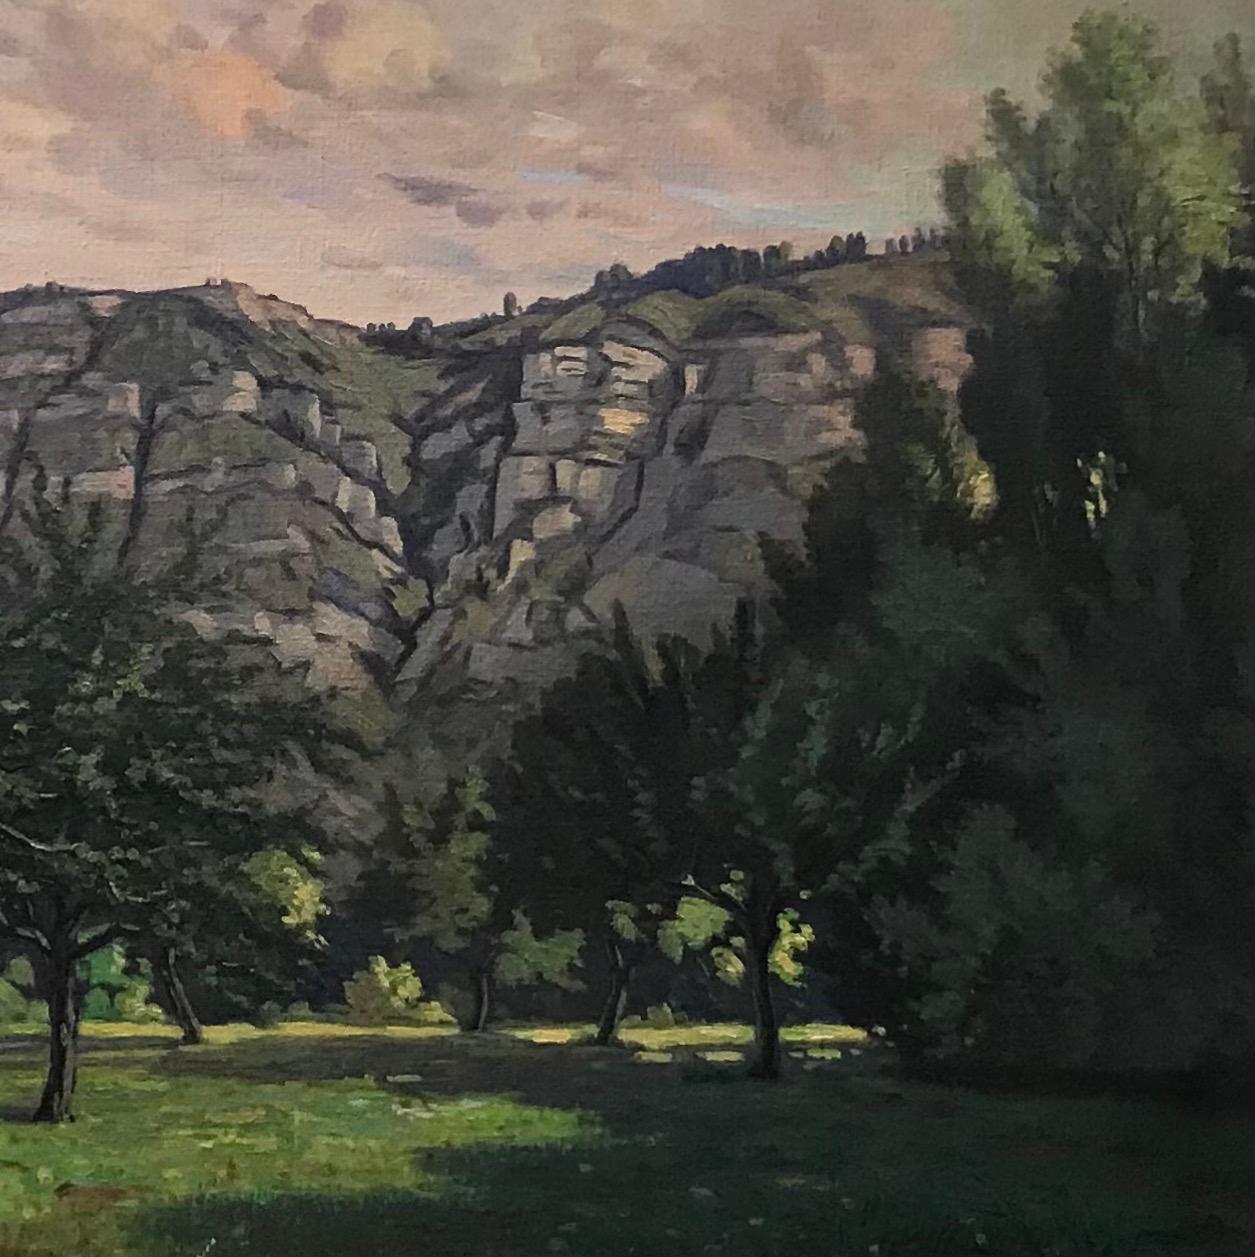 Orchard at the foot of Salève - Oil on canvas 61x81 cm - Black Landscape Painting by Unknown